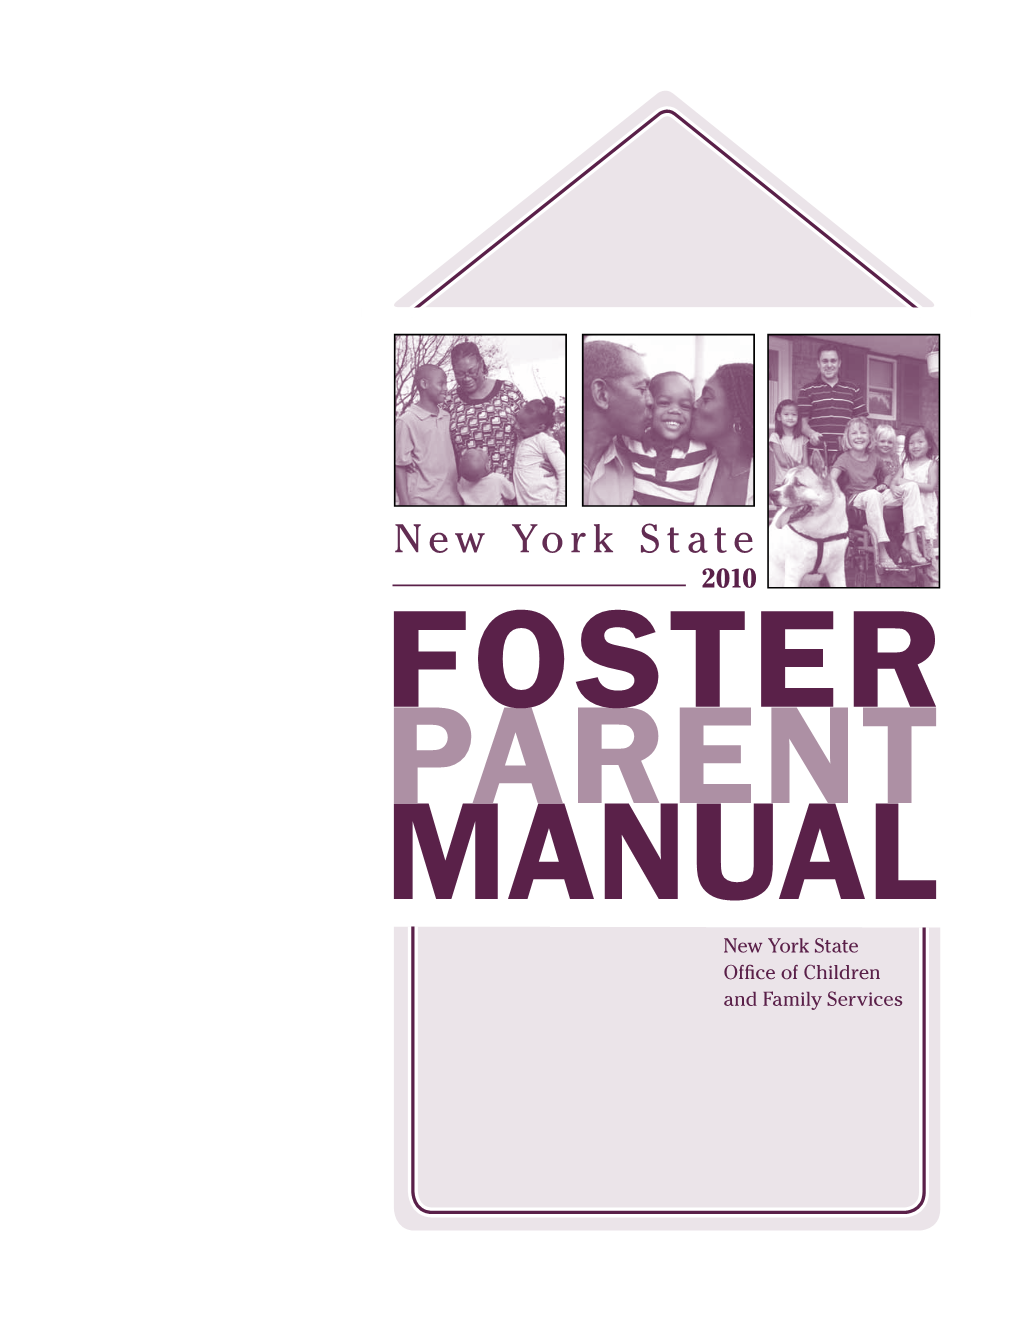 New York State Foster Parent Manual His Manual Was Developed for Use in Your Day-To-Day Life with to the the Children in Your Care